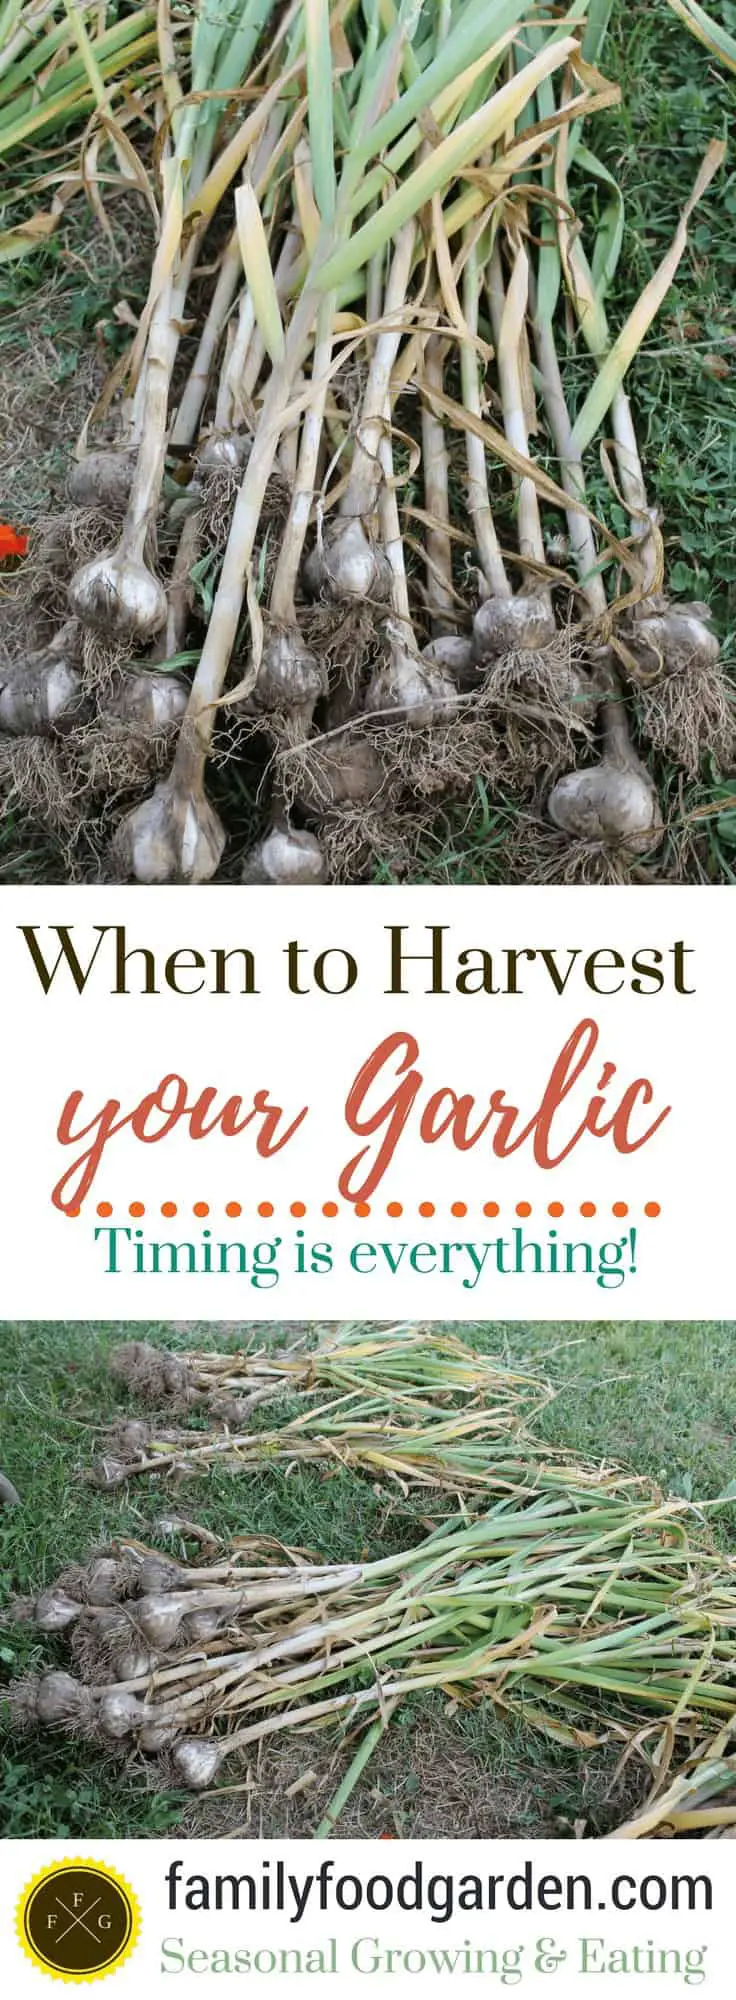 Timing is everything when harvesting garlic! Learn how to harvest garlic and how to cure garlic